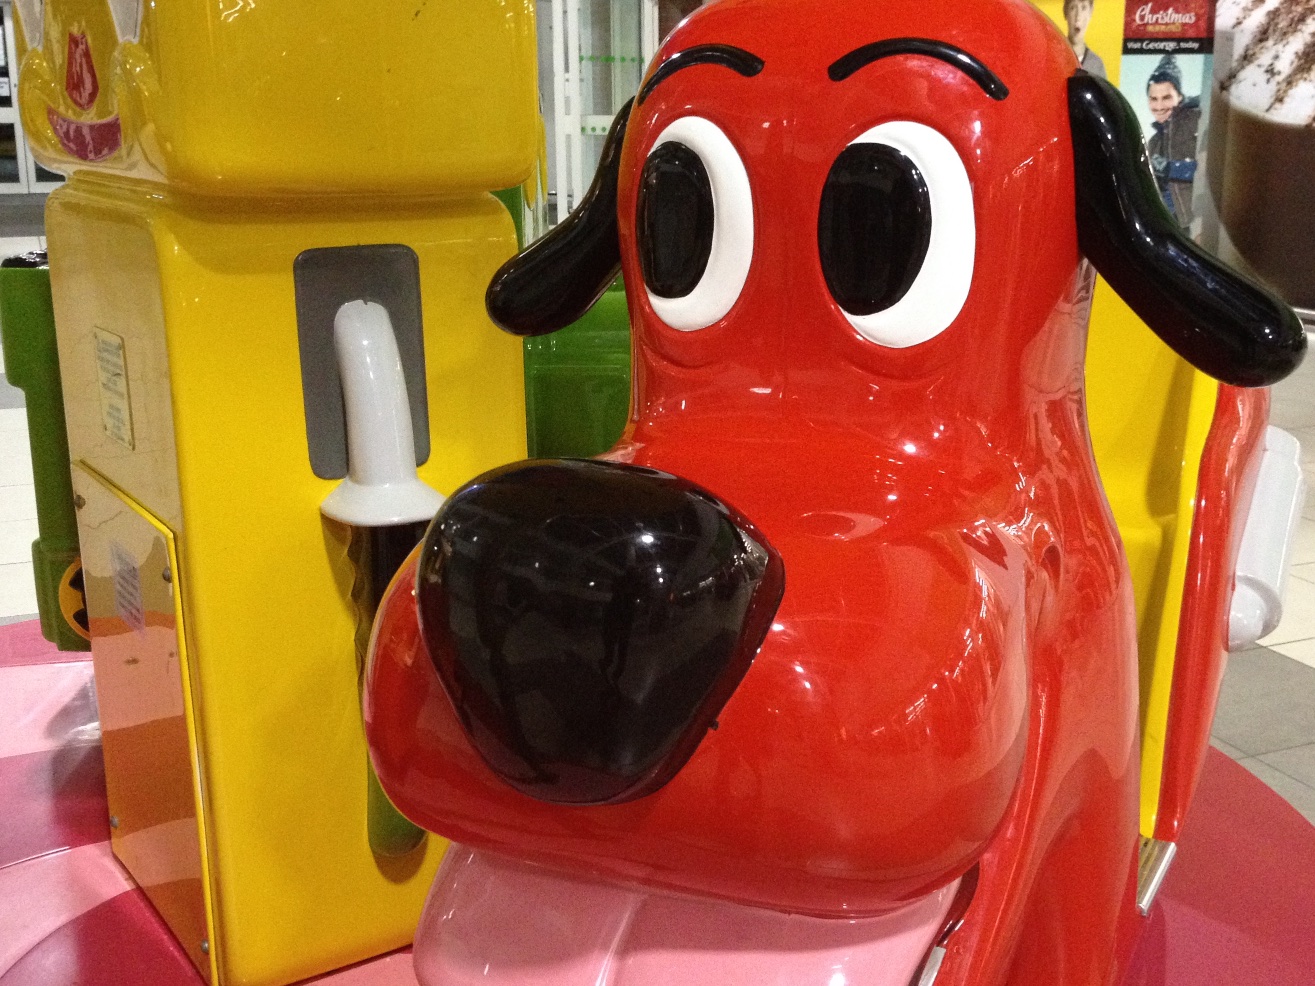 there is a large red dog statue in the shape of a toy